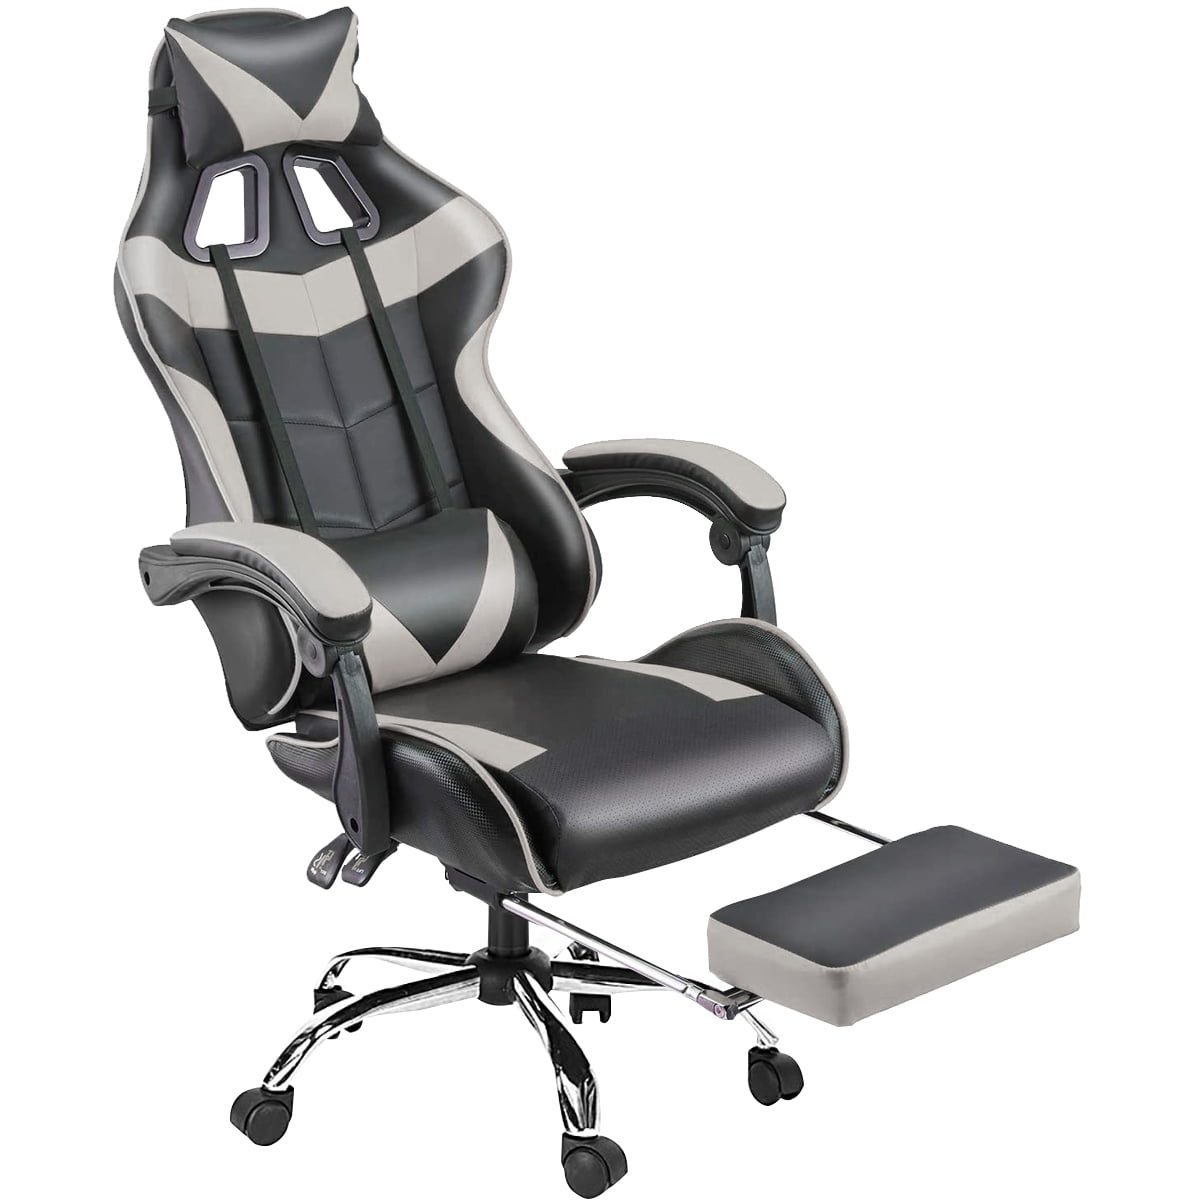 Gaming Chair Racing Style Office Chair Swivel Rocker Recliner Computer Chair Leather High Back Ergonomic Computer Desk Chair with Footrest Black,2 